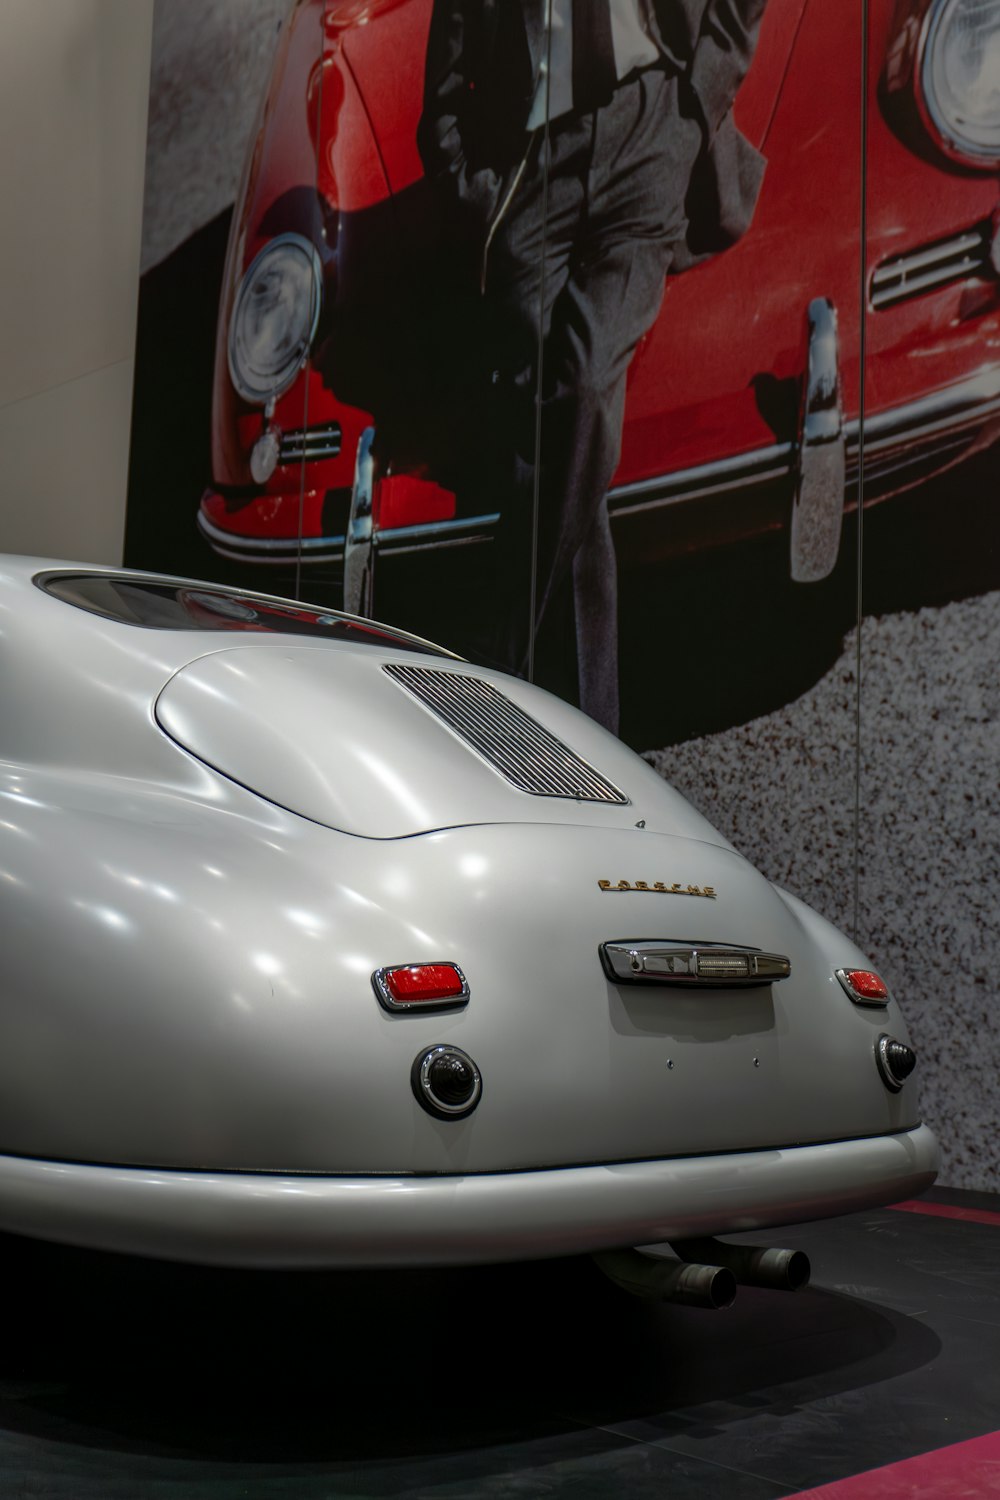 a silver sports car on display in a museum